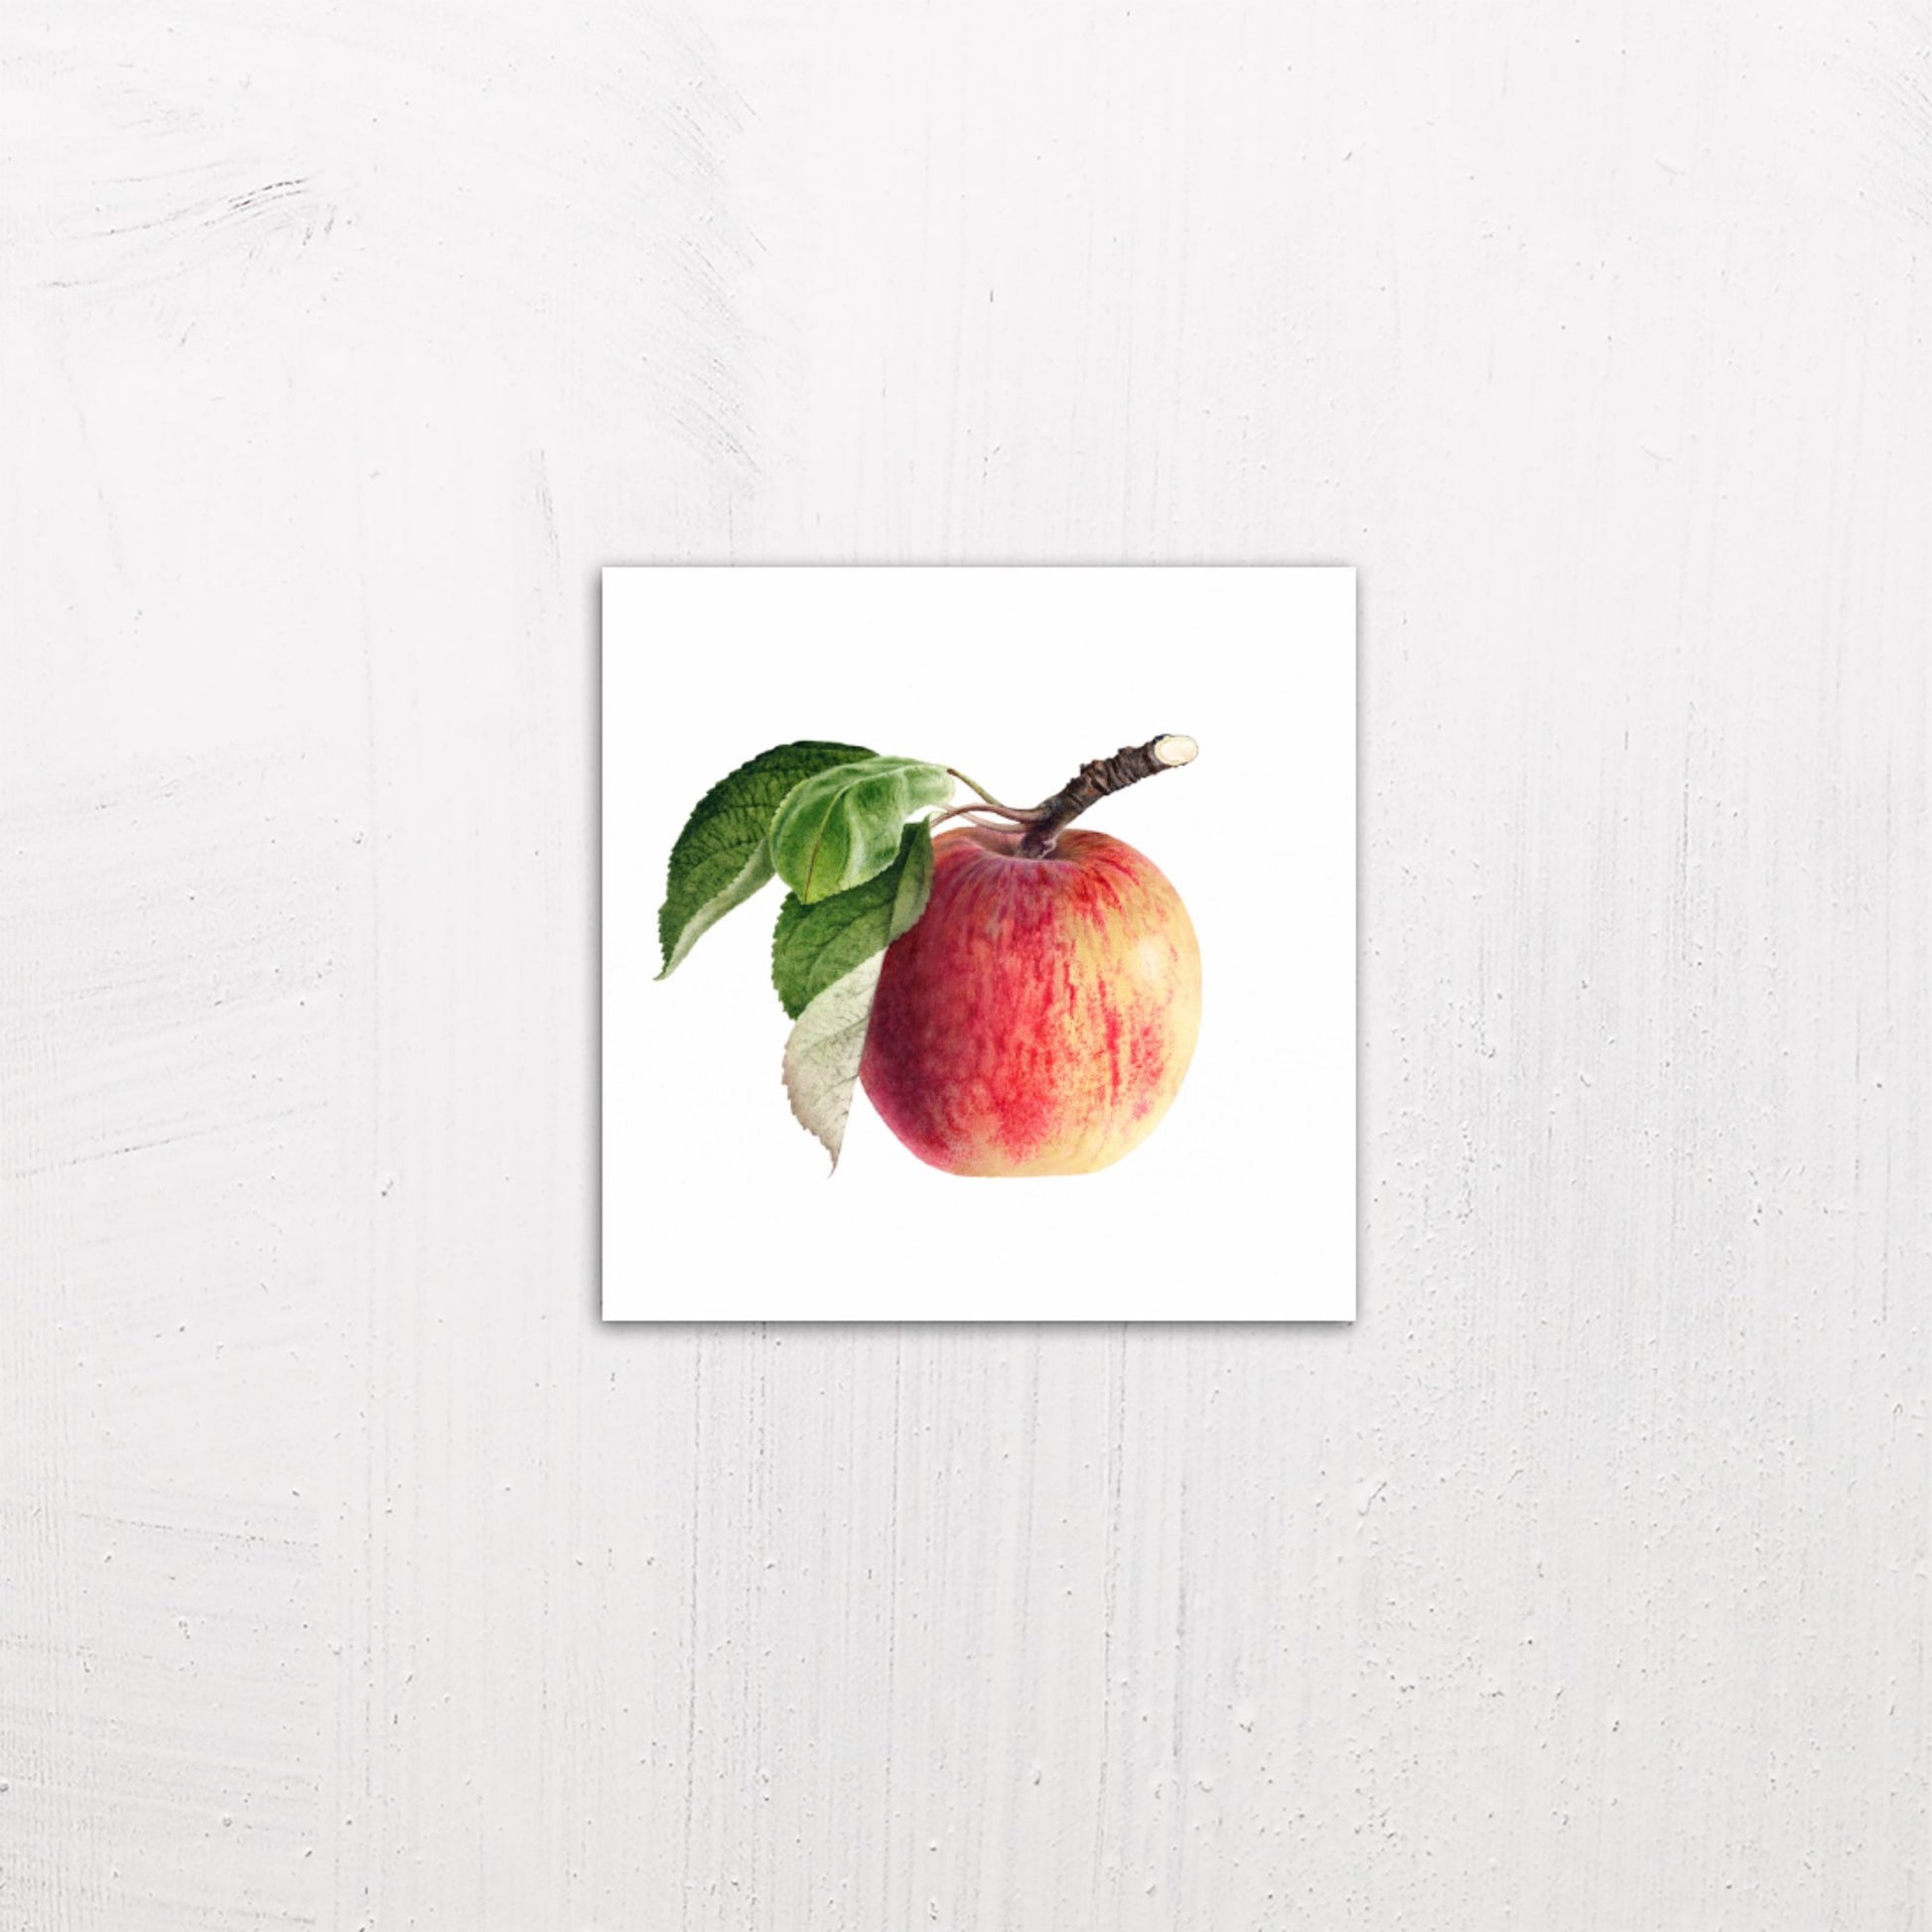 A small size metal art poster display plate with printed design of a Vintage Apple Illustration